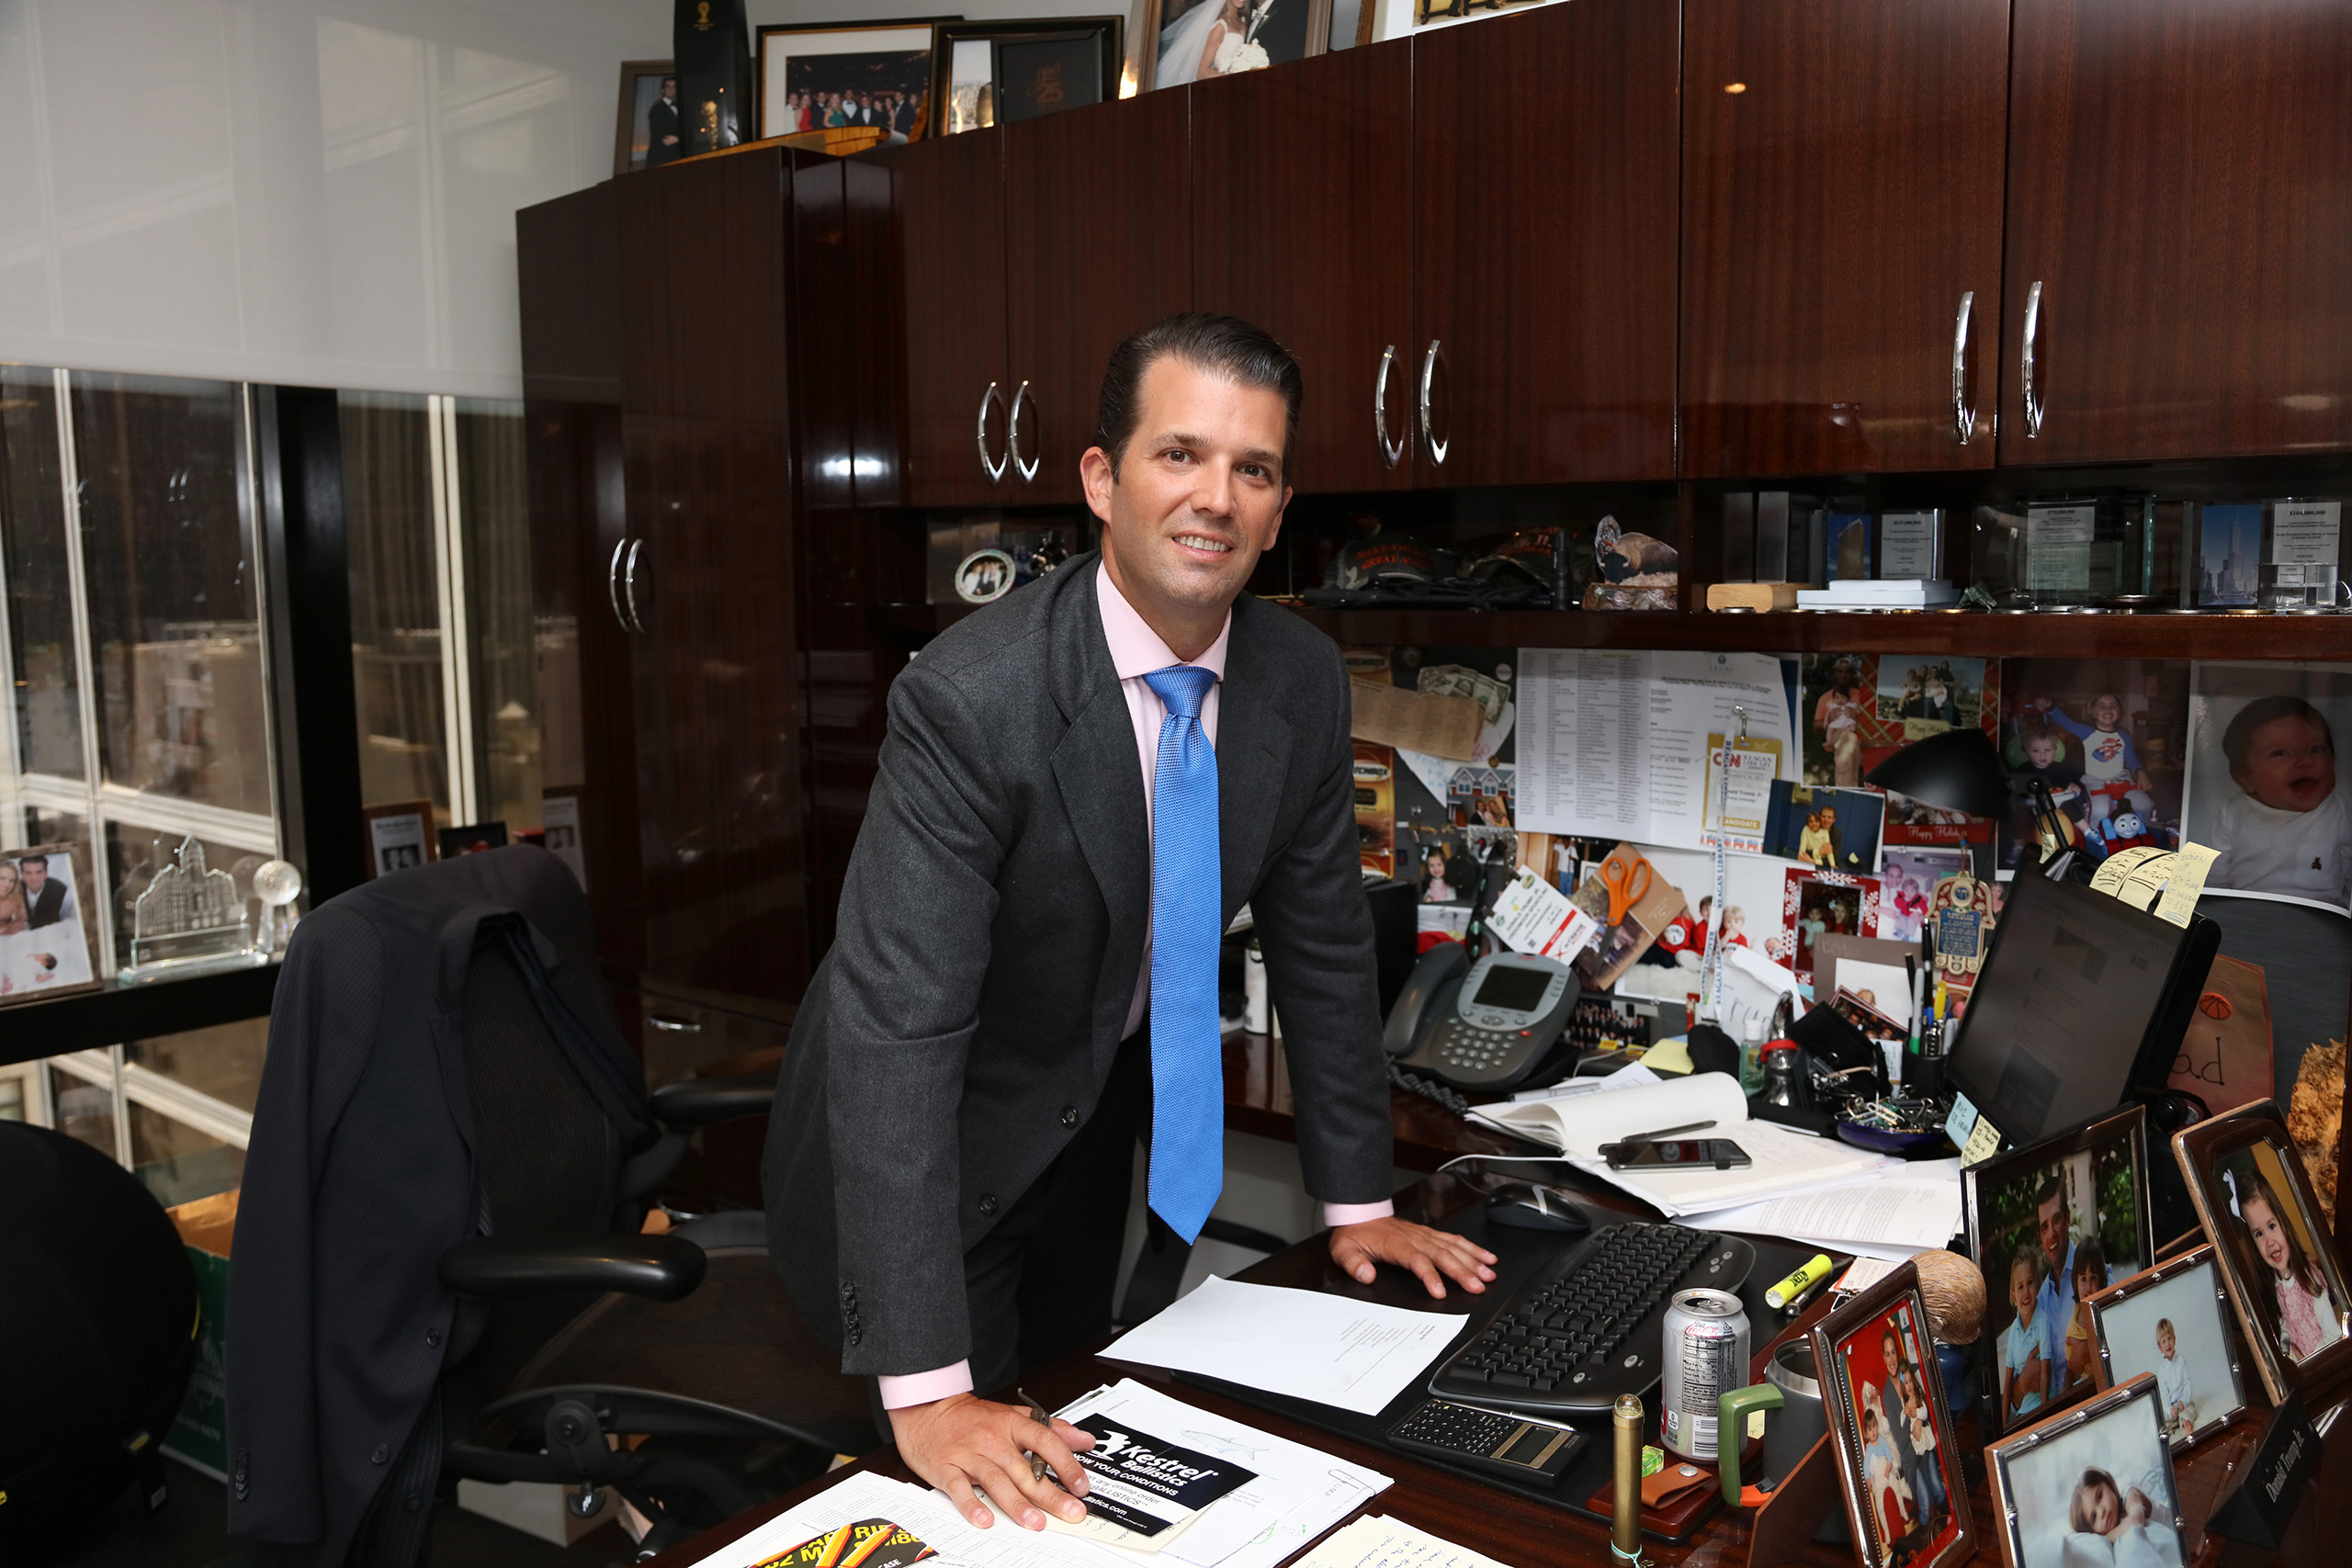 Donald Trump Jr. in his office at Trump Tower in New York City on July 6, 2016.